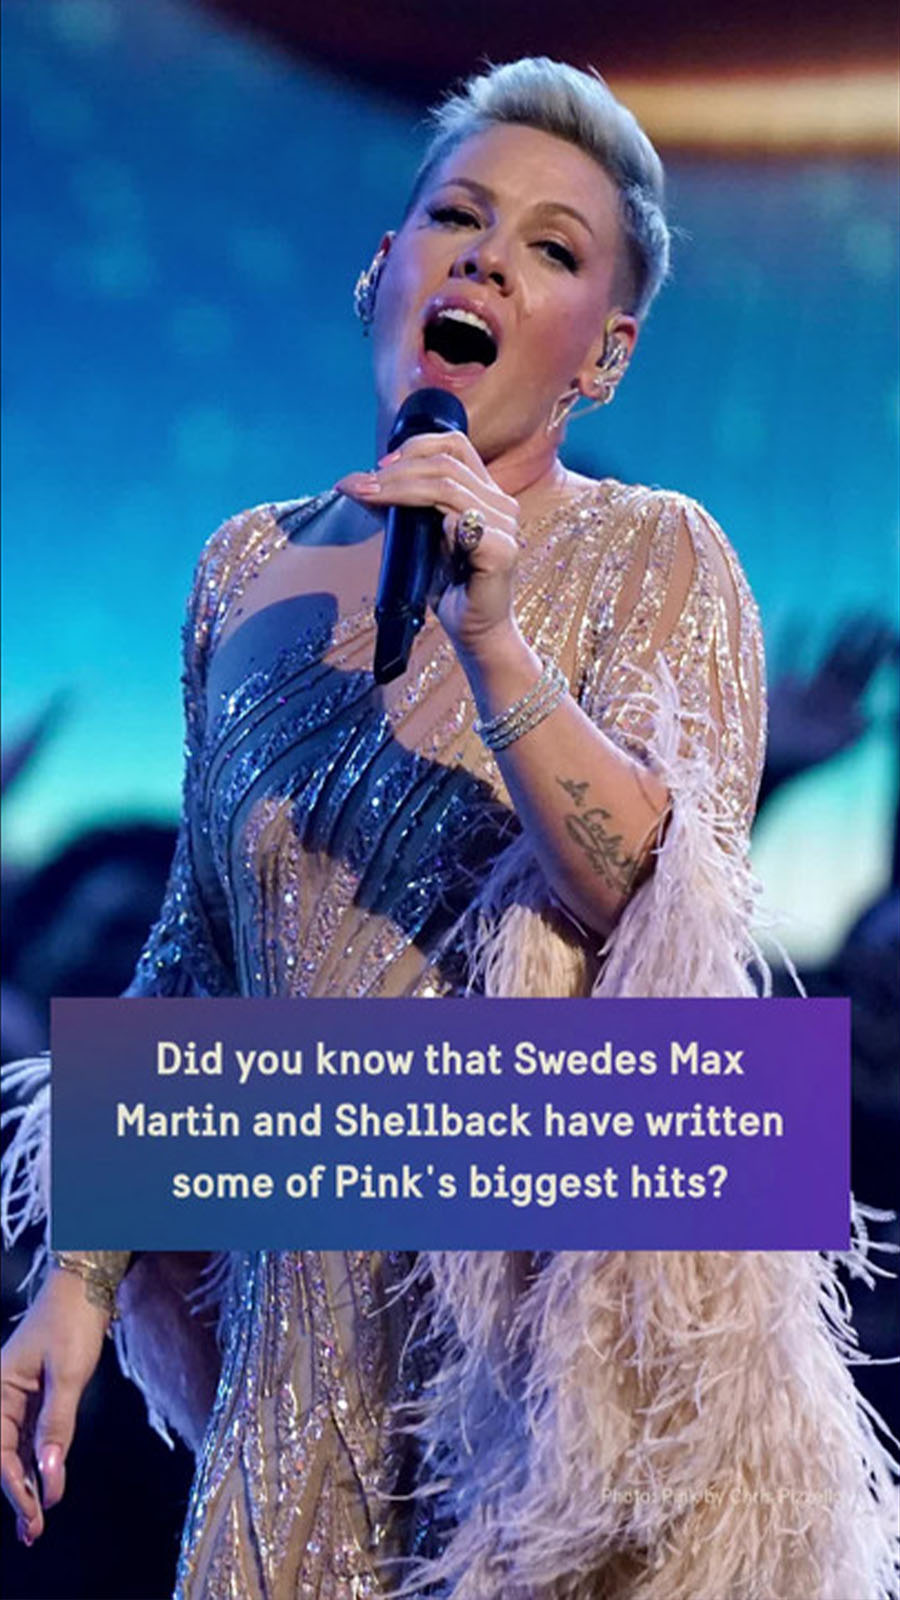 Artist Pink singing on a stage.